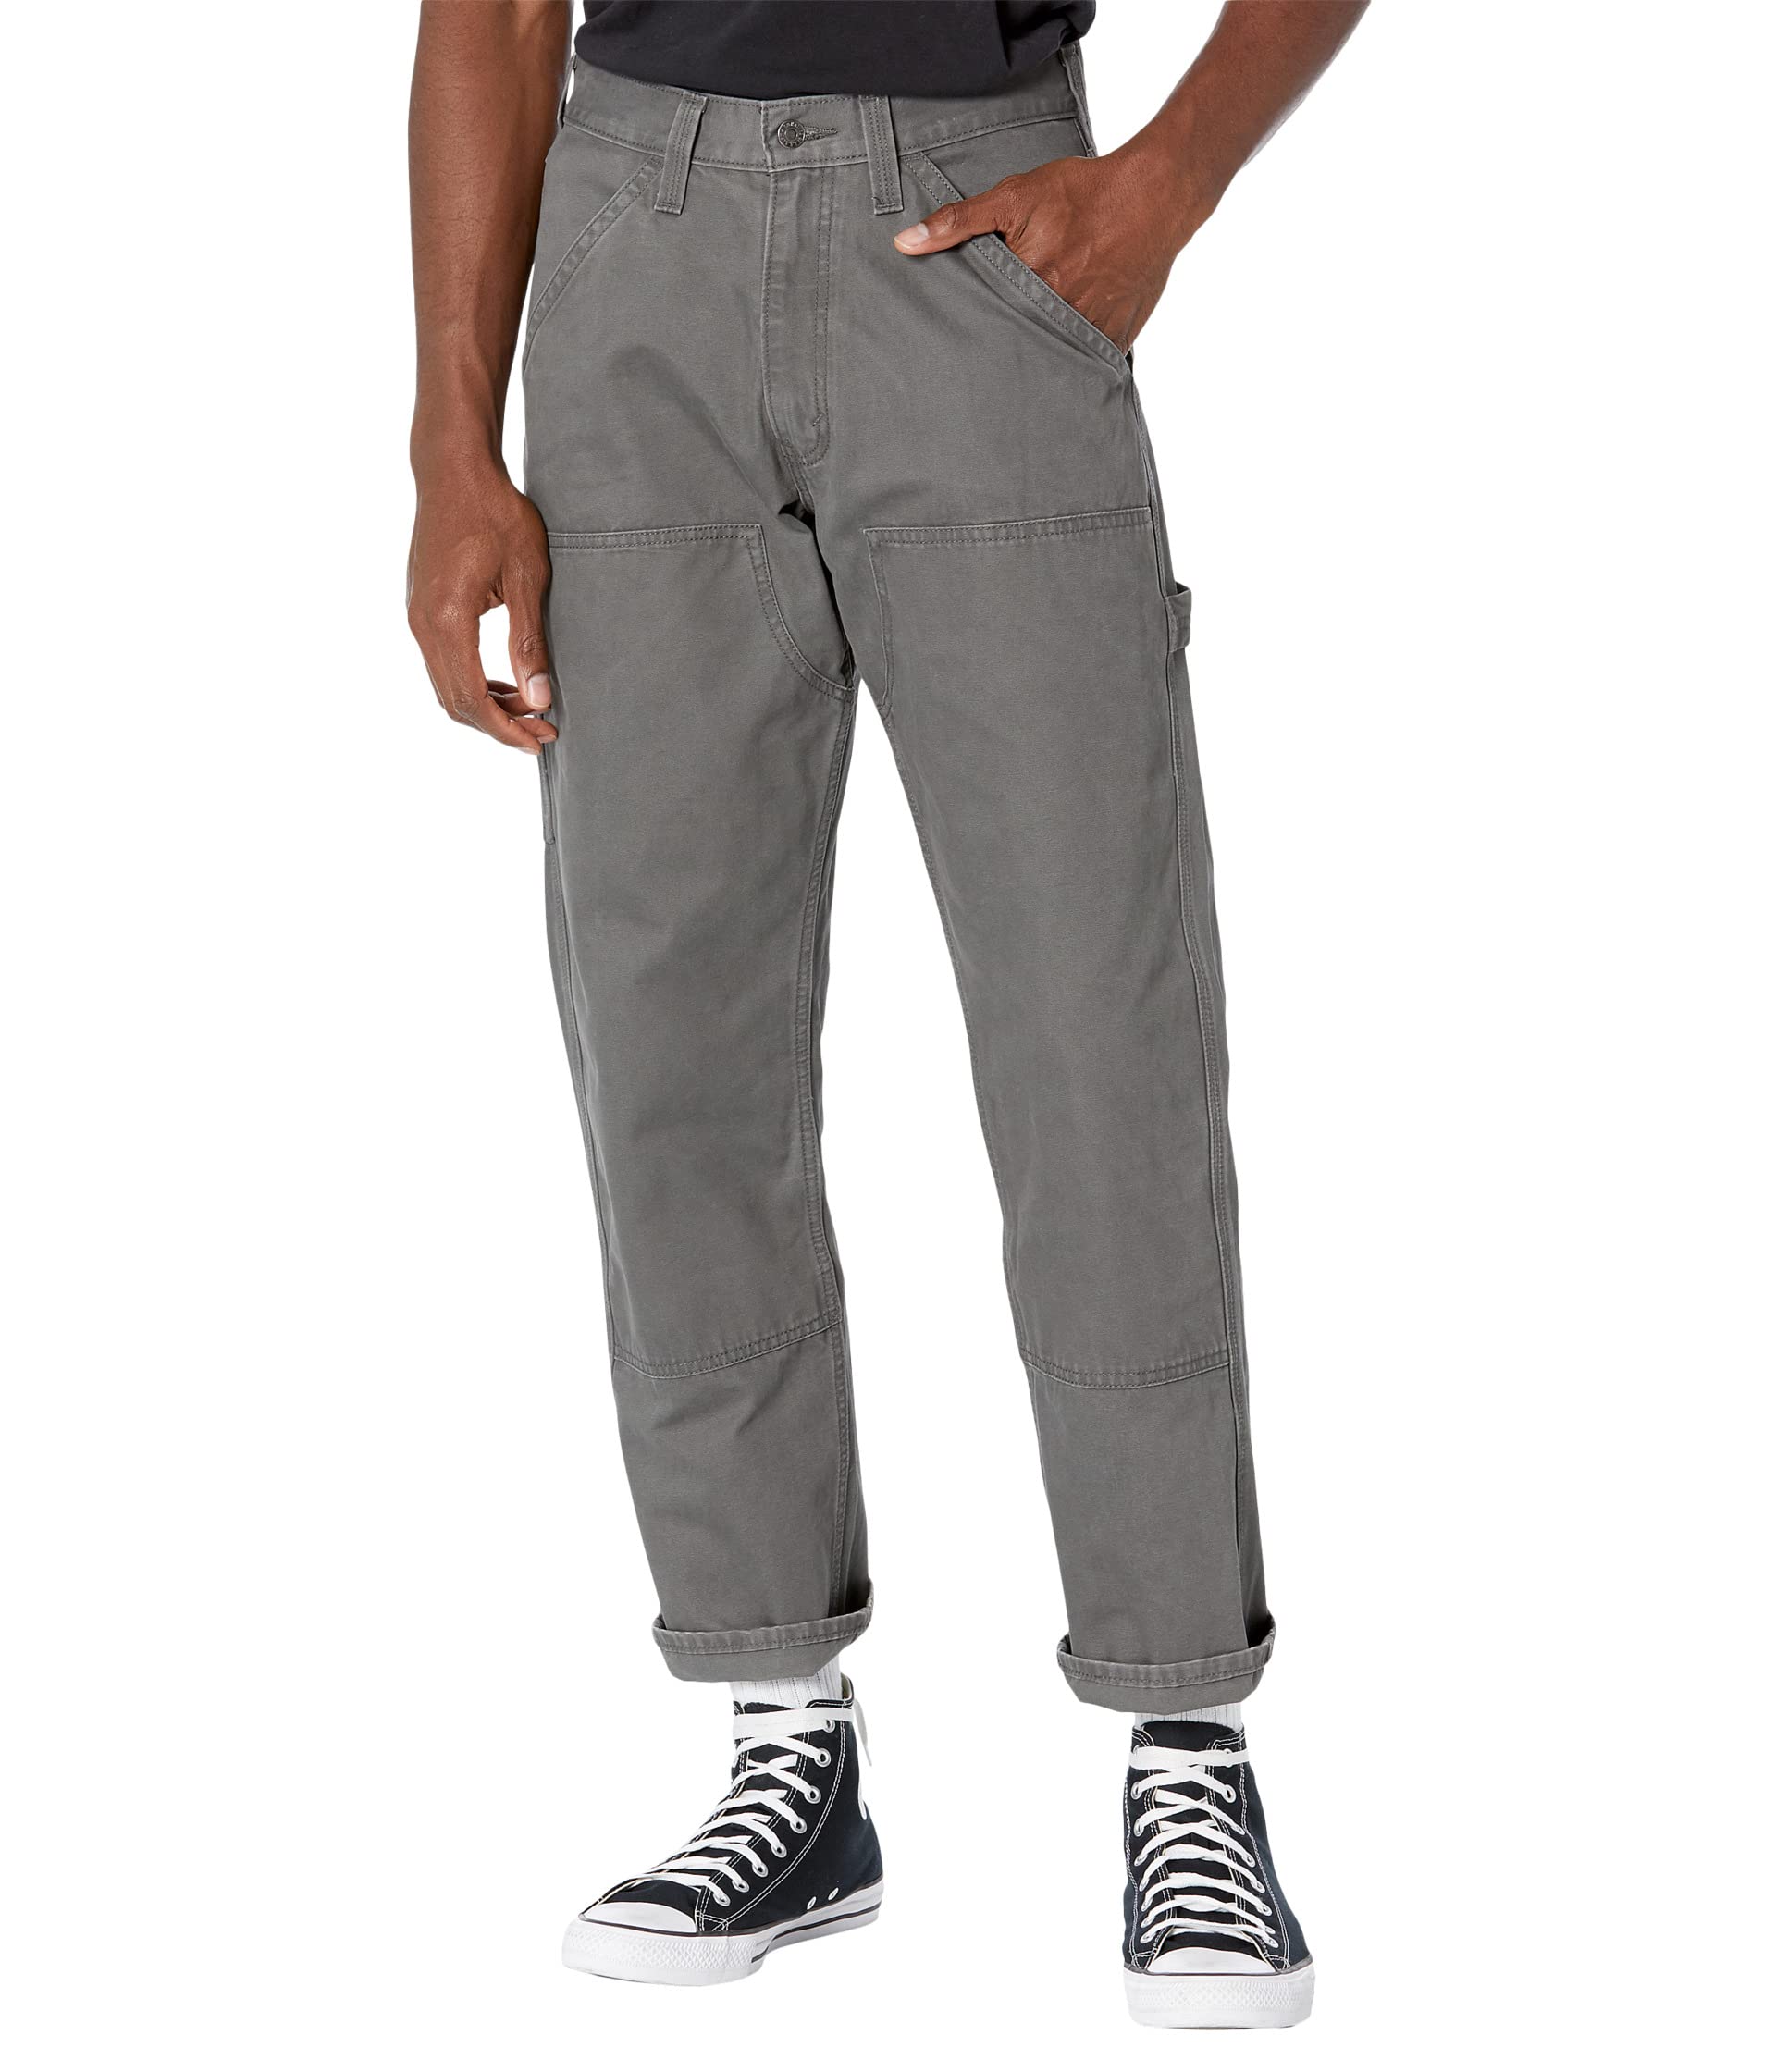 косметичка travelcosmetic signature bold grey wc1033 Брюки Signature by Levi Strauss & Co. Gold Label, Double Front Work Pants